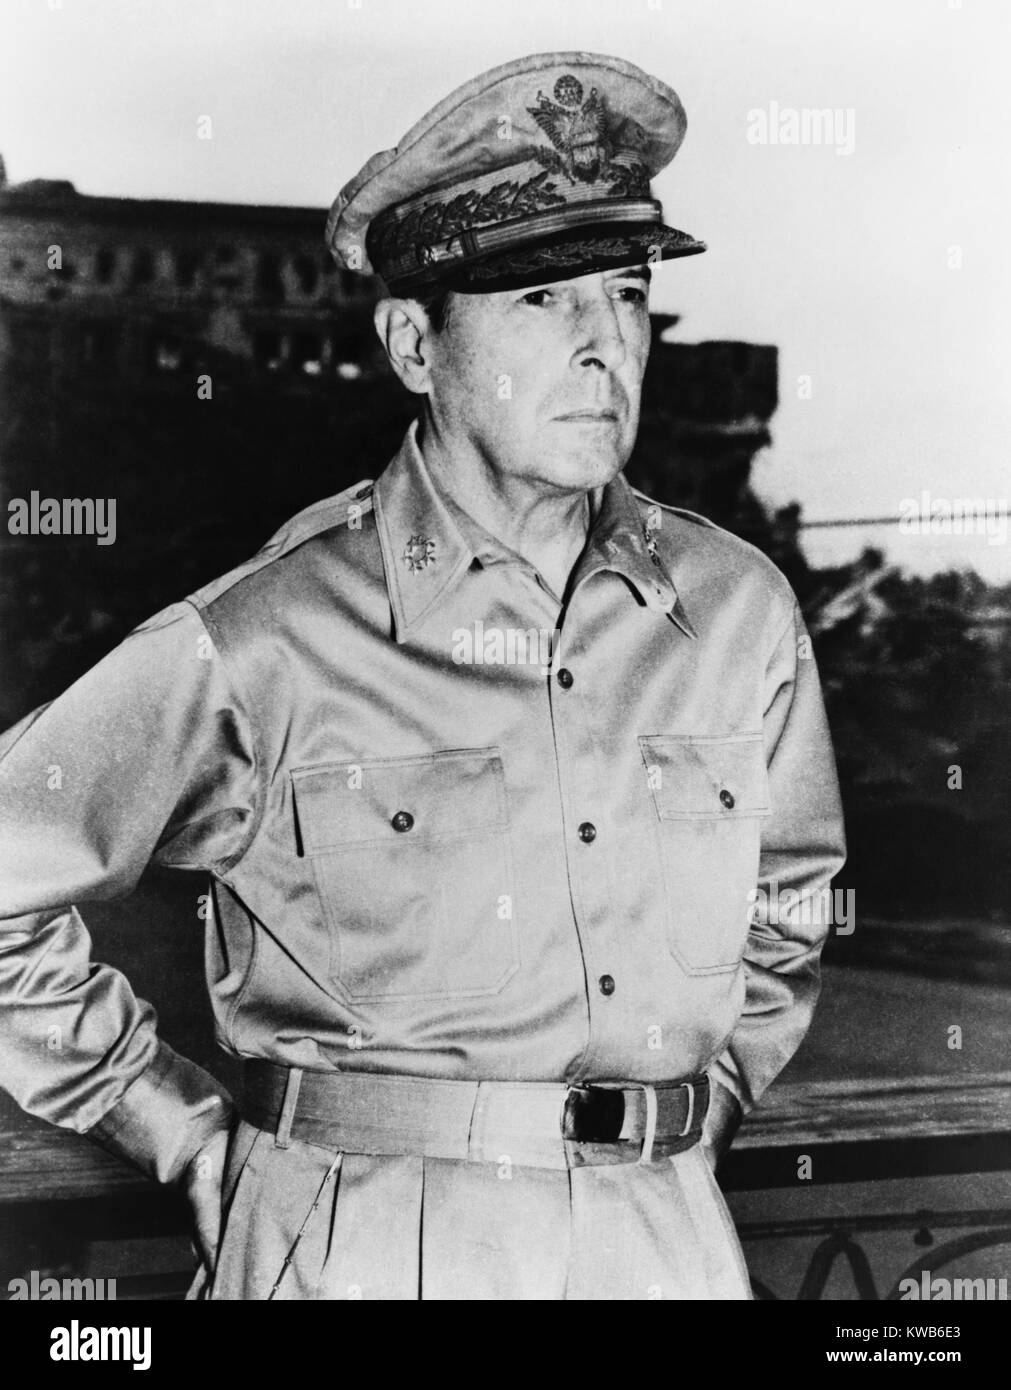 General Douglas Macarthur in the last days of World War 2, August 24. 1945. Within the month he was named Supreme Commander for the Allied Powers in Japan, to oversee the occupation and reconstruction of the defeated nation. (BSLOC 2014 8 123) Stock Photo